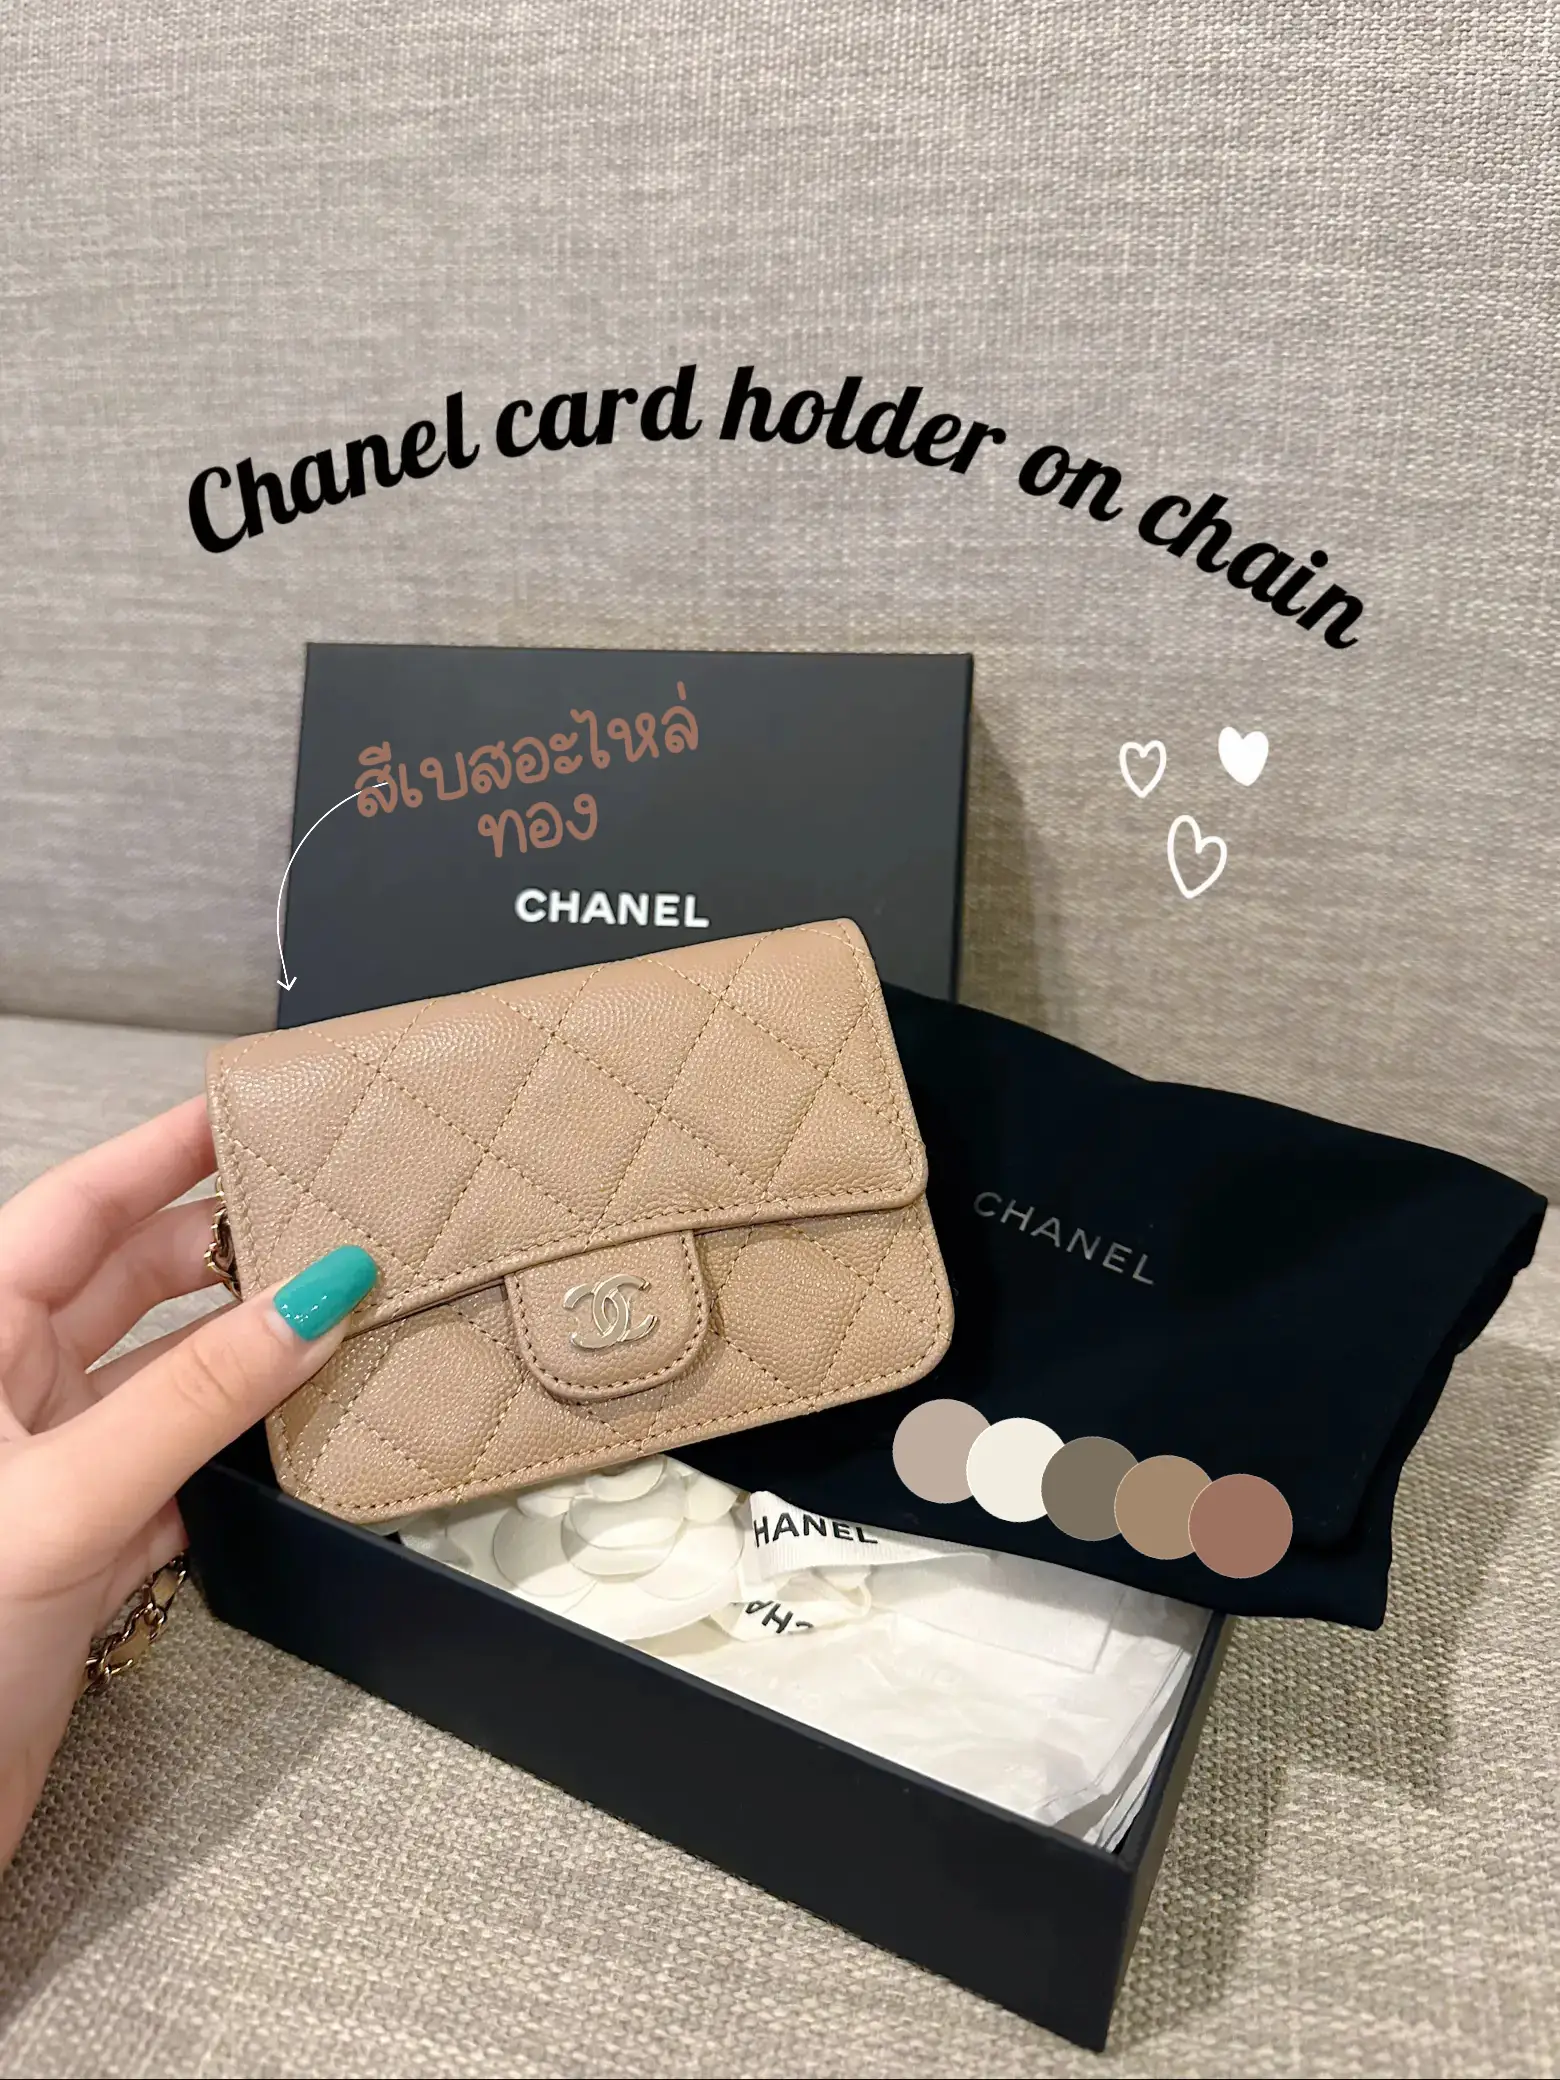 Brand name review Chanel card holder on chain, Gallery posted by Livia.nvt